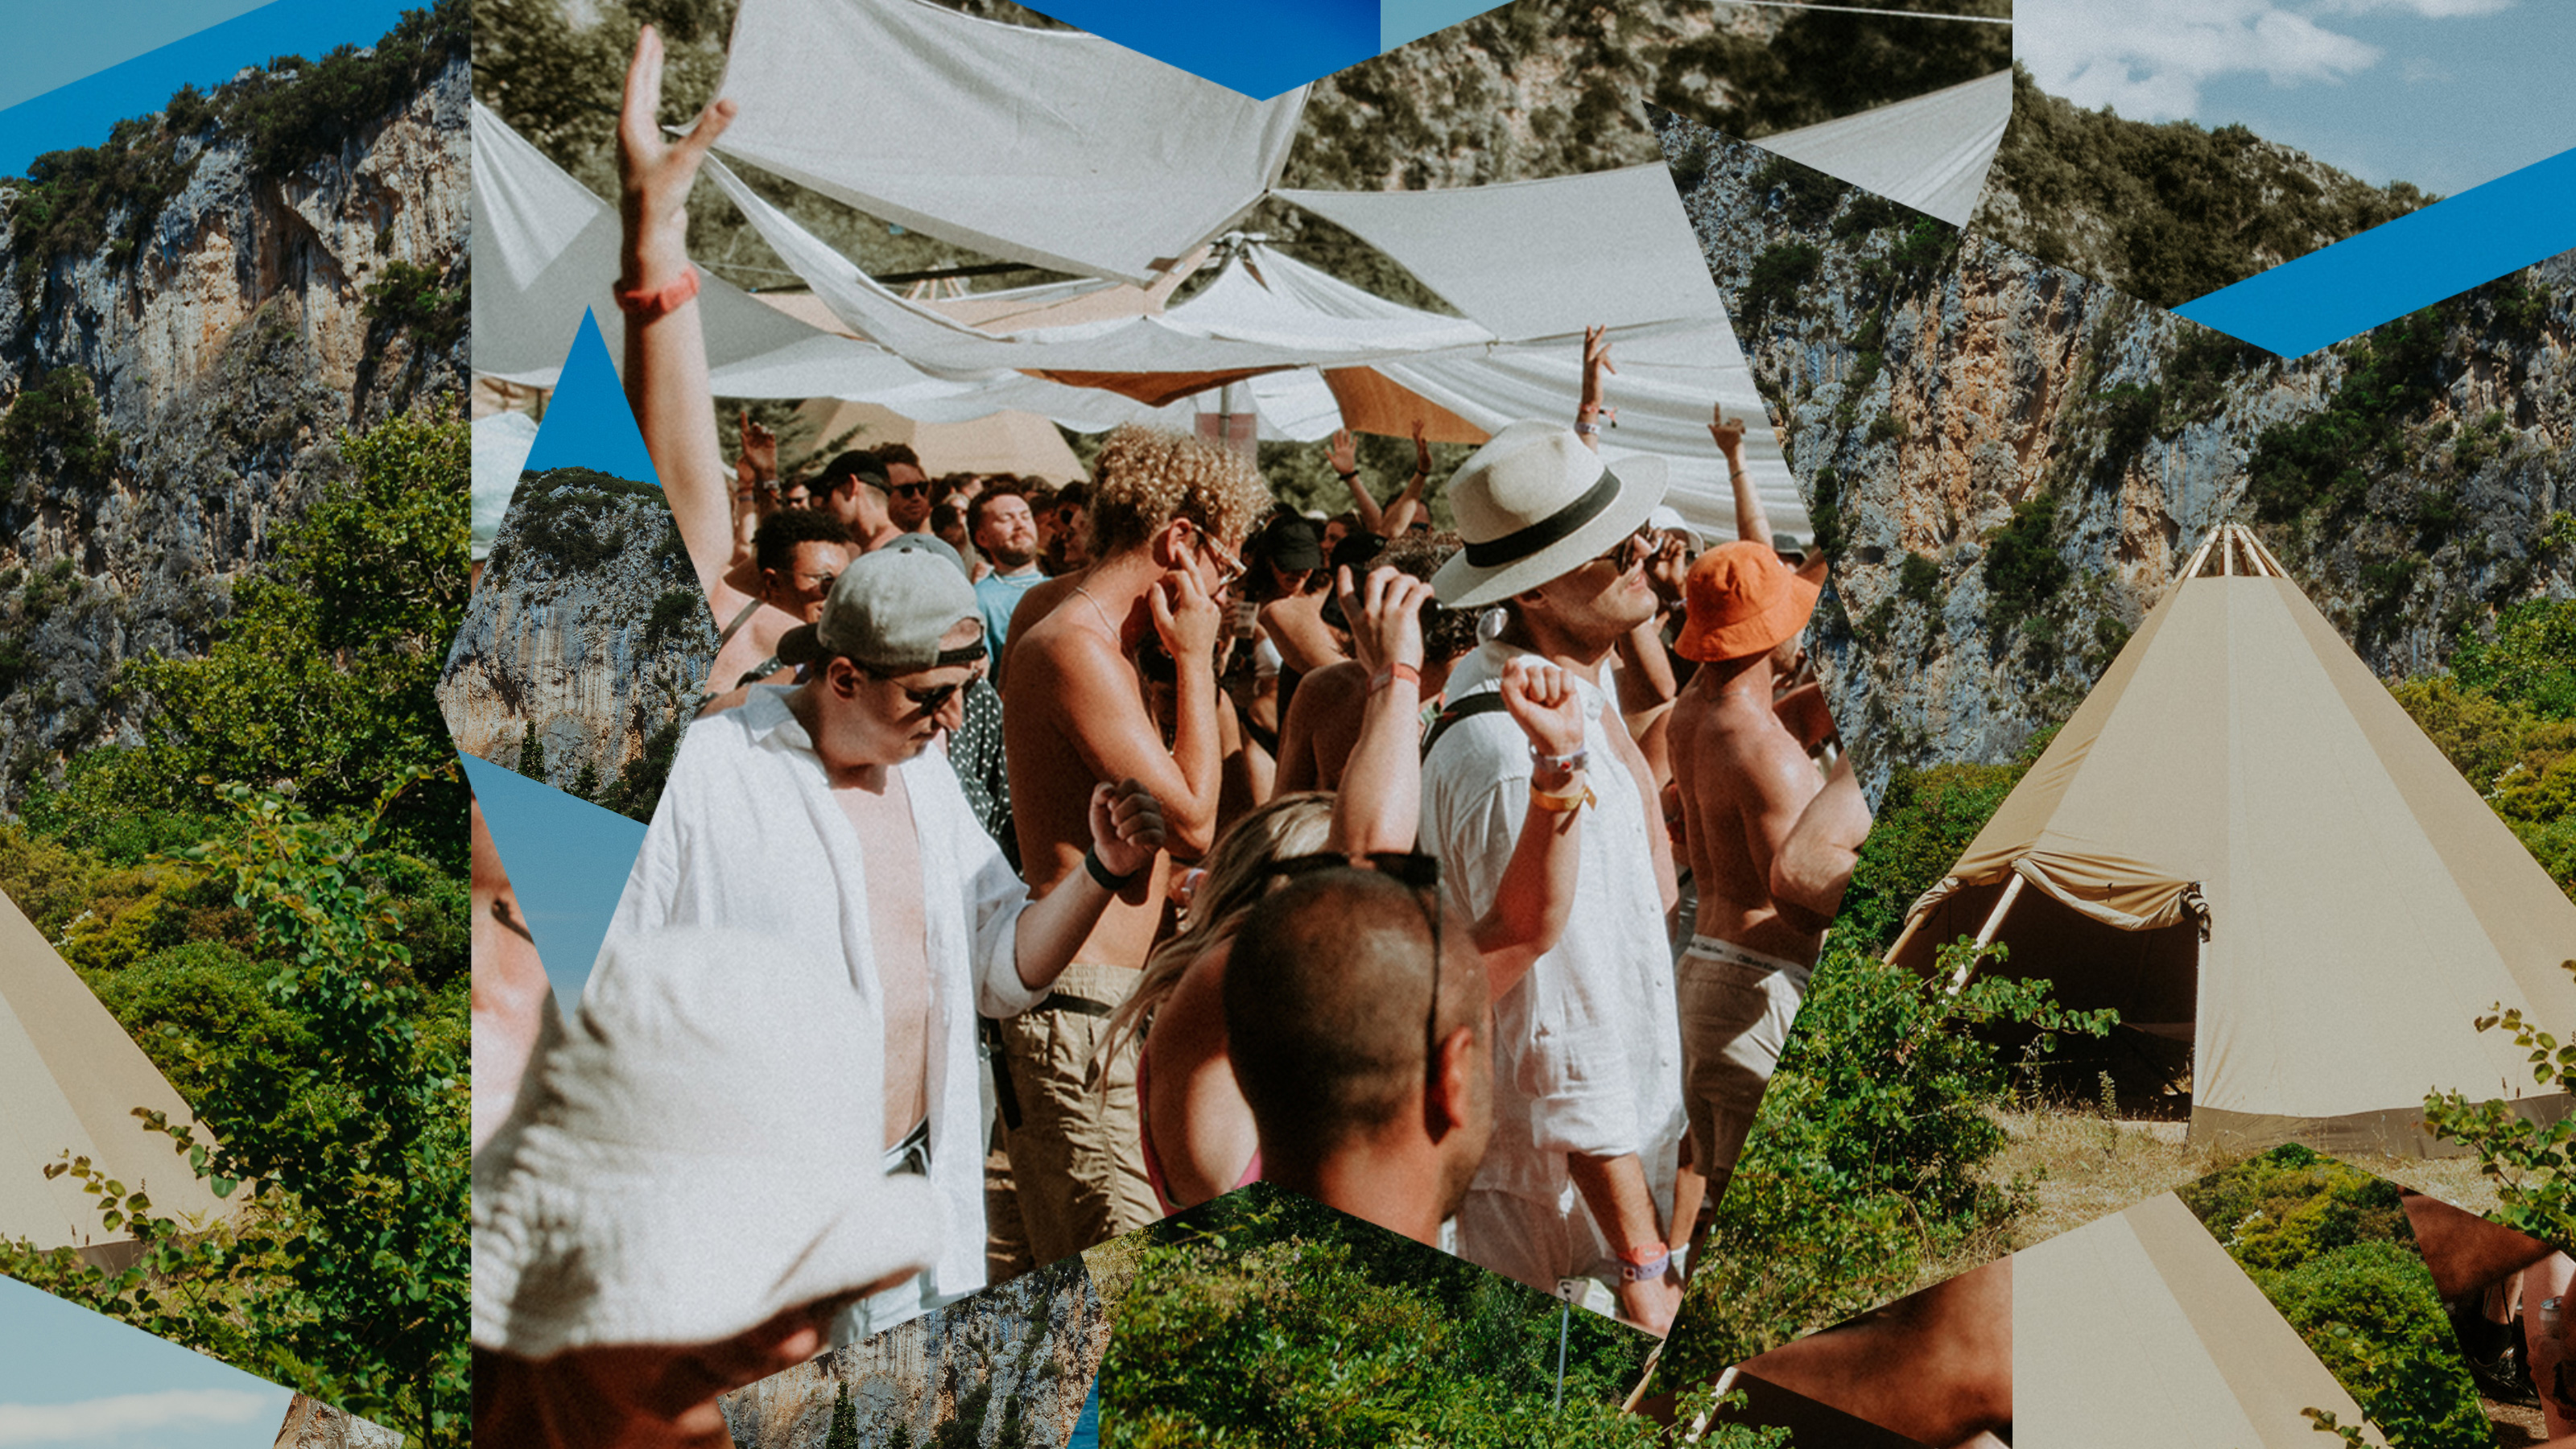 Can Destination Festivals Exist in Harmony With Local Communities?